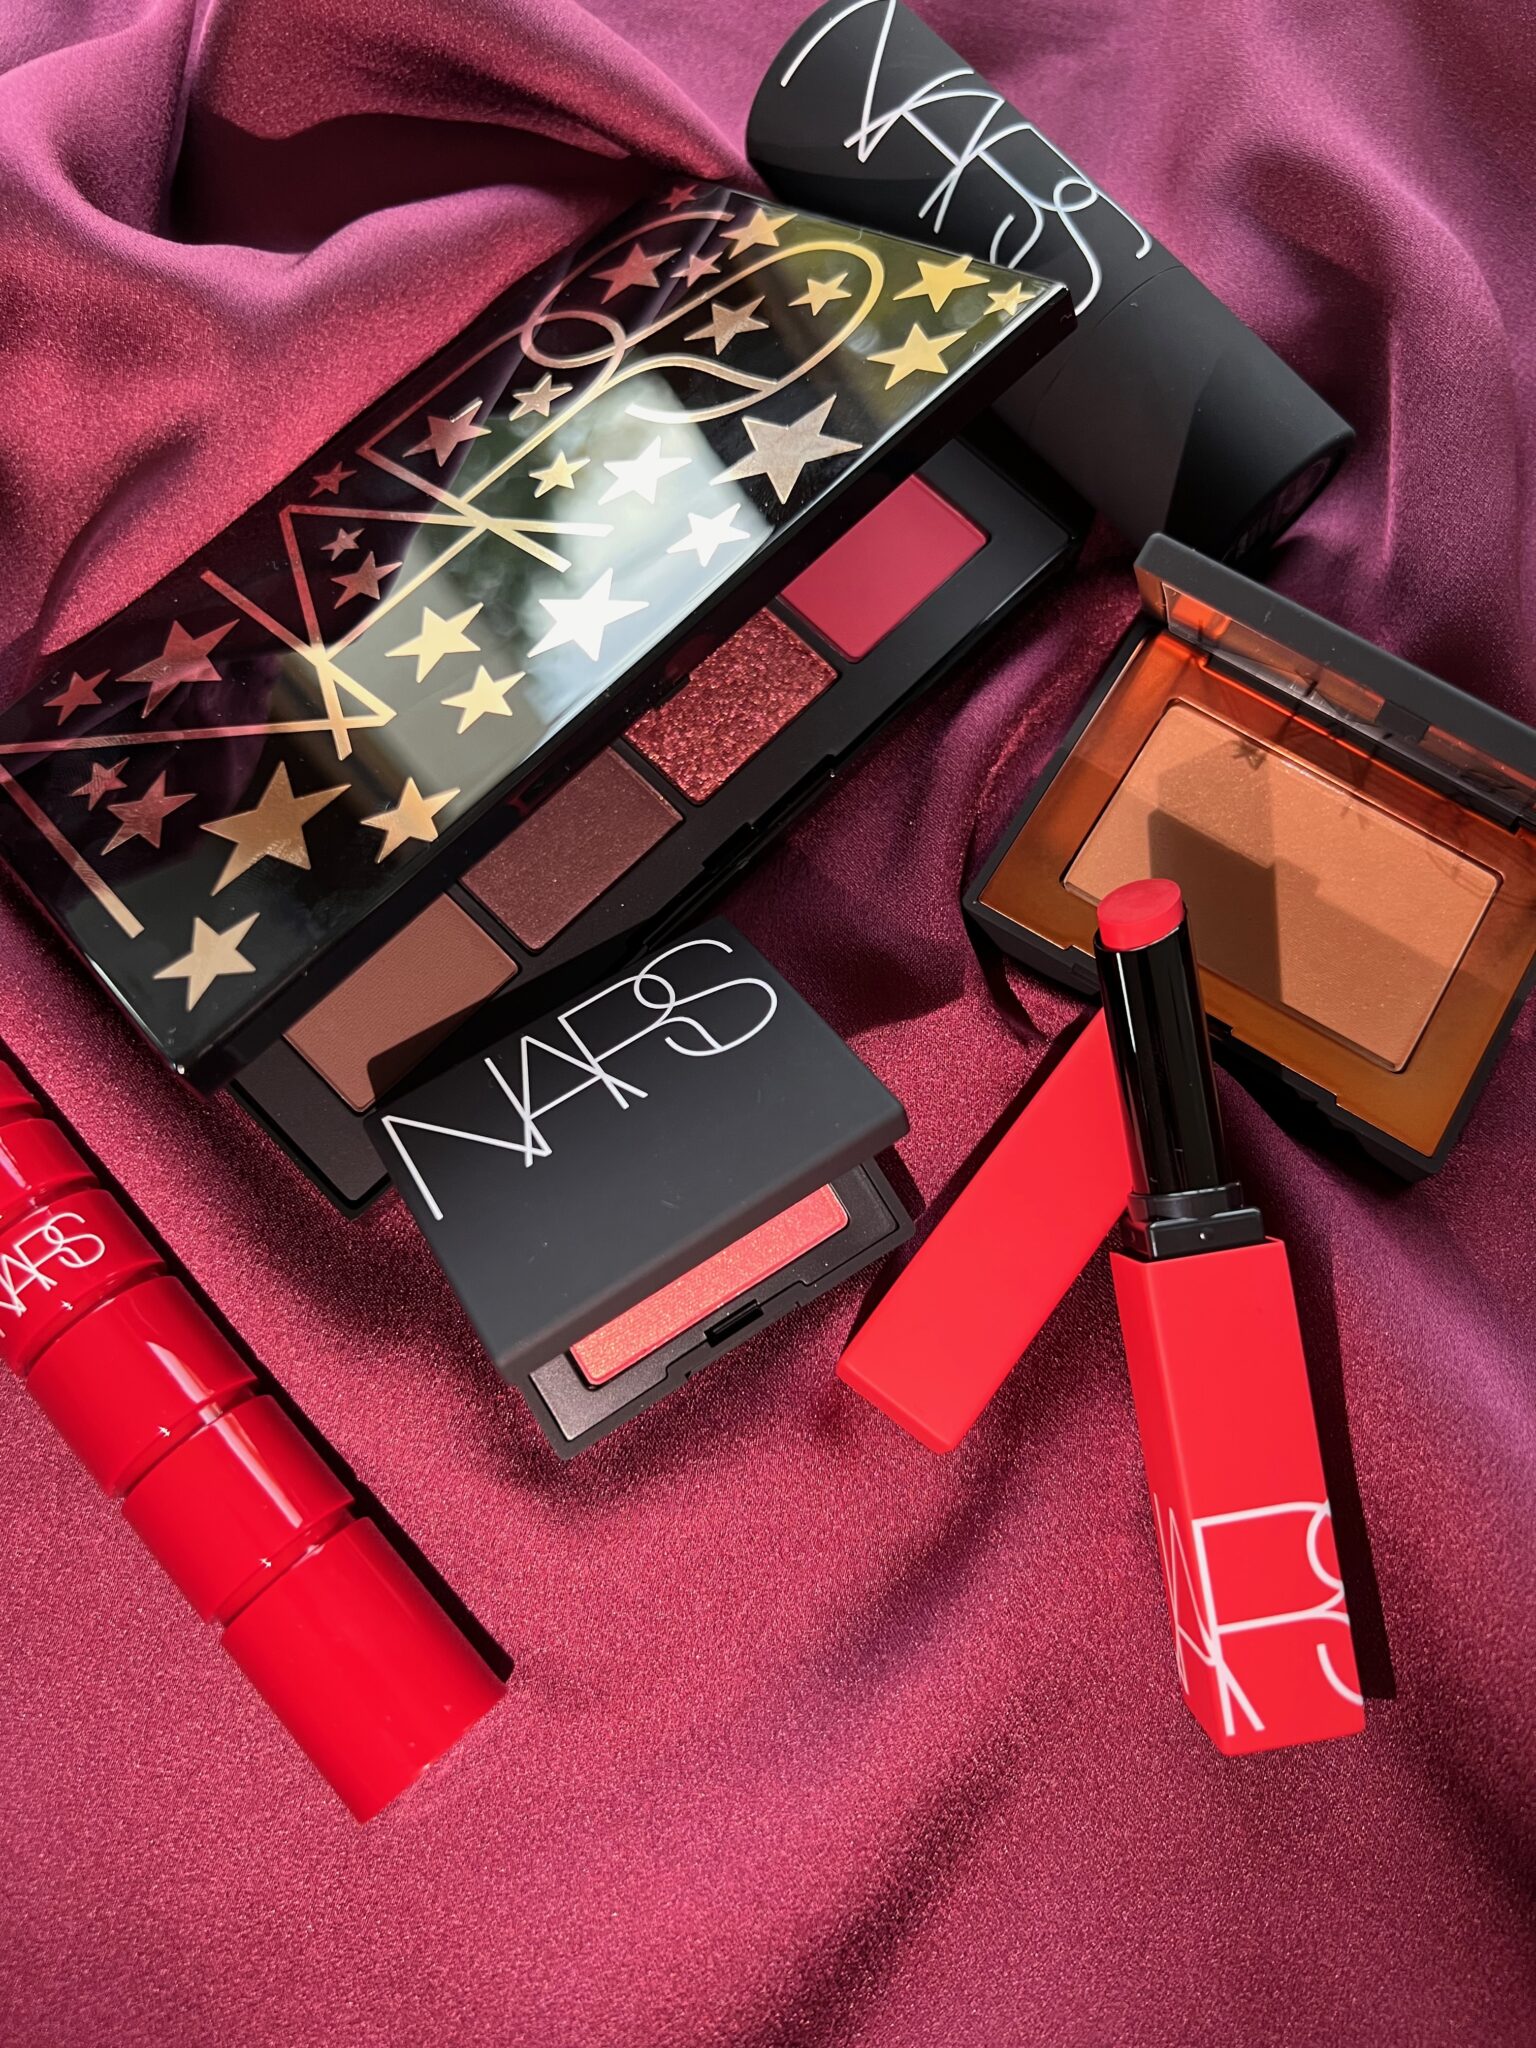 Christmas at Sephora - Top Holiday 2022 Gift Sets For Women. Nars, Sephora, Benefit and more. 1